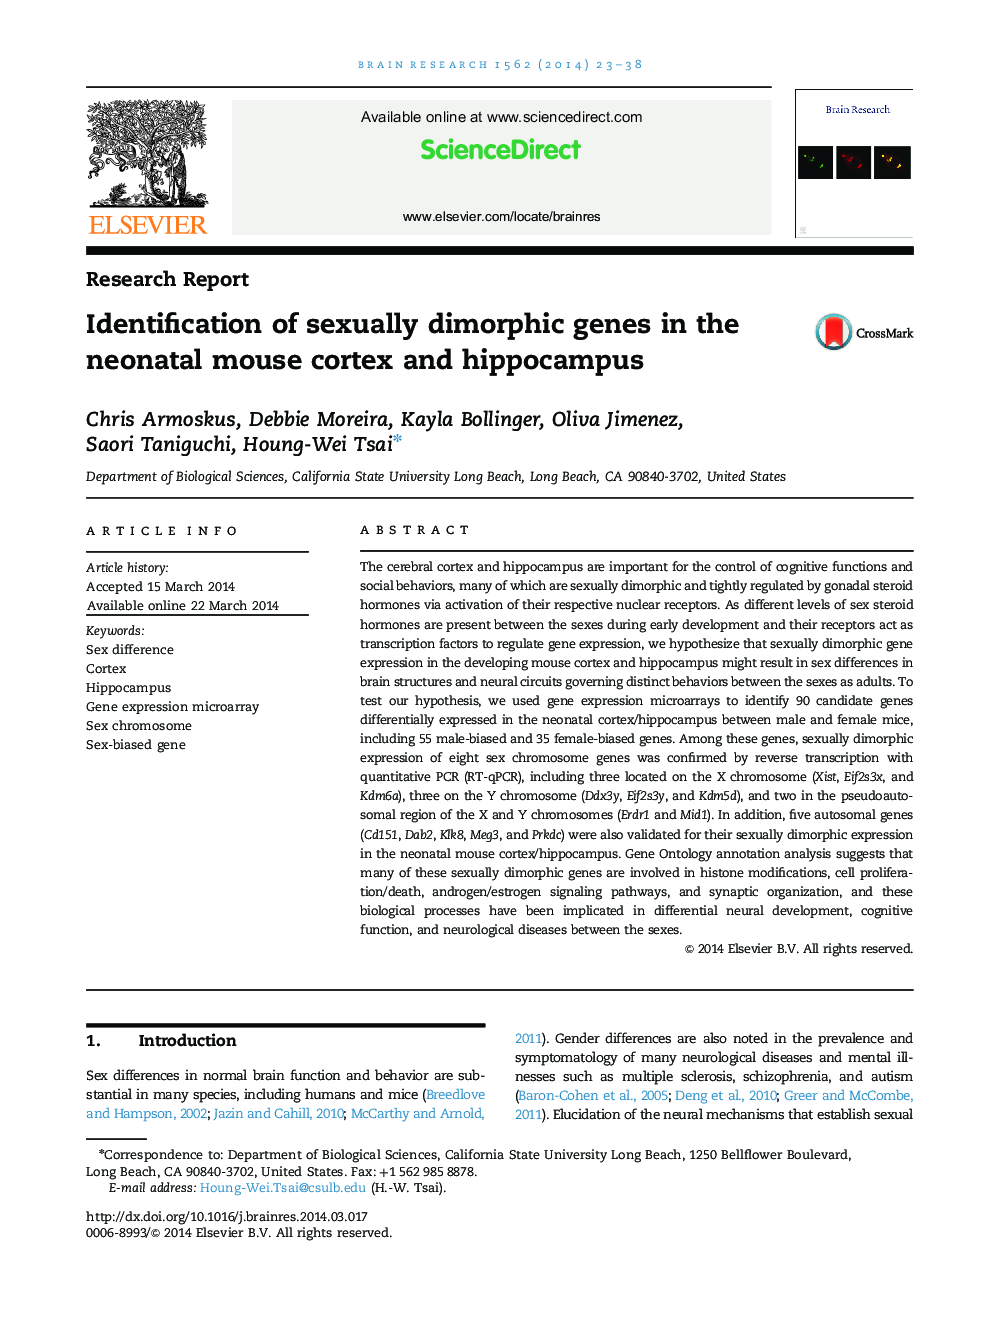 Identification of sexually dimorphic genes in the neonatal mouse cortex and hippocampus